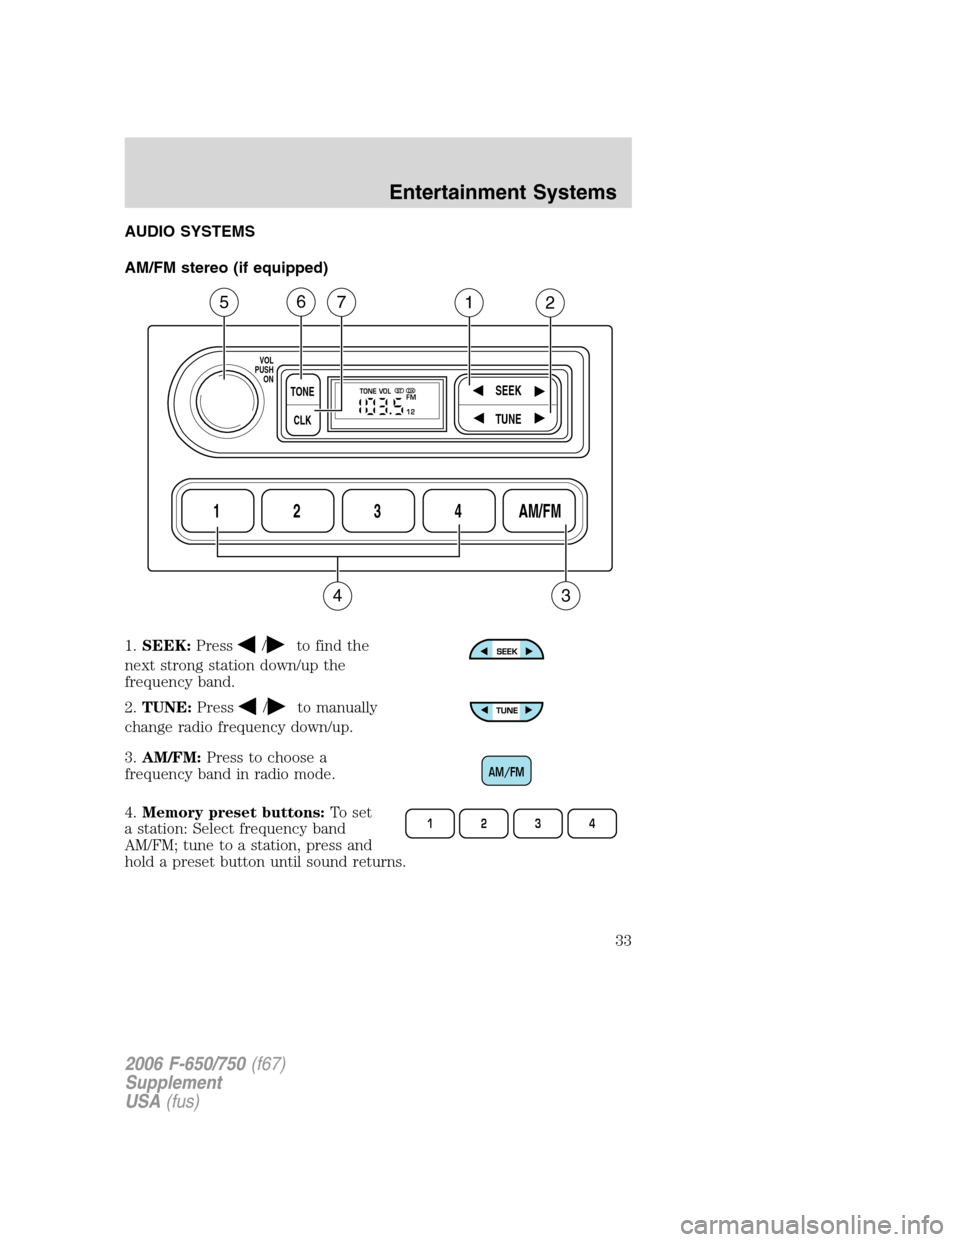 FORD F650 2006 11.G Owners Manual AUDIO SYSTEMS
AM/FM stereo (if equipped)
1.SEEK:Press
/to find the
next strong station down/up the
frequency band.
2.TUNE:Press
/to manually
change radio frequency down/up.
3.AM/FM:Press to choose a
f